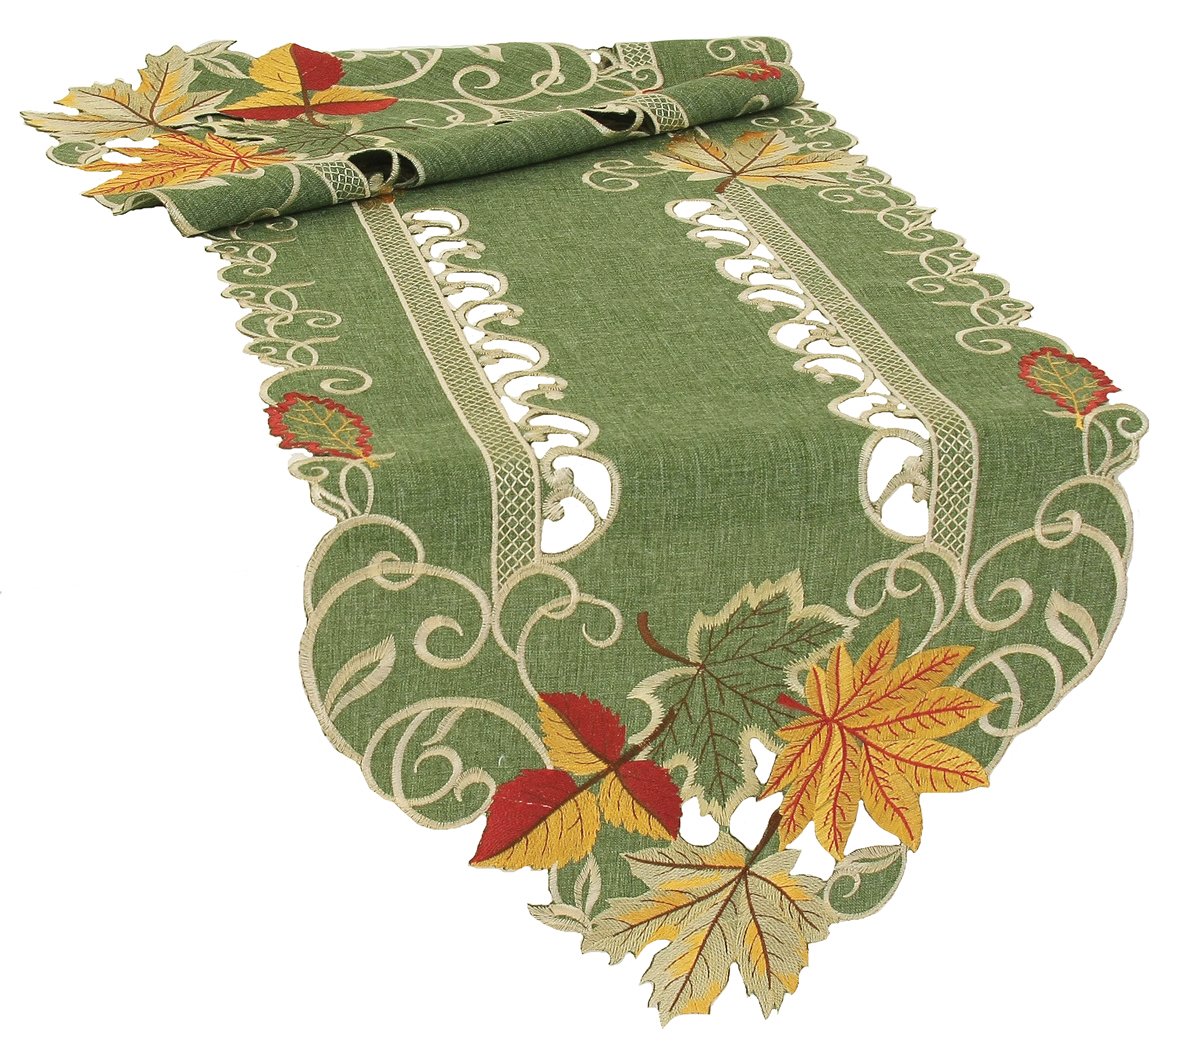 Xia Home Fashions Delicate Leaves Embroidered Cutwork Fall Table Runner, 15 by 54-Inch